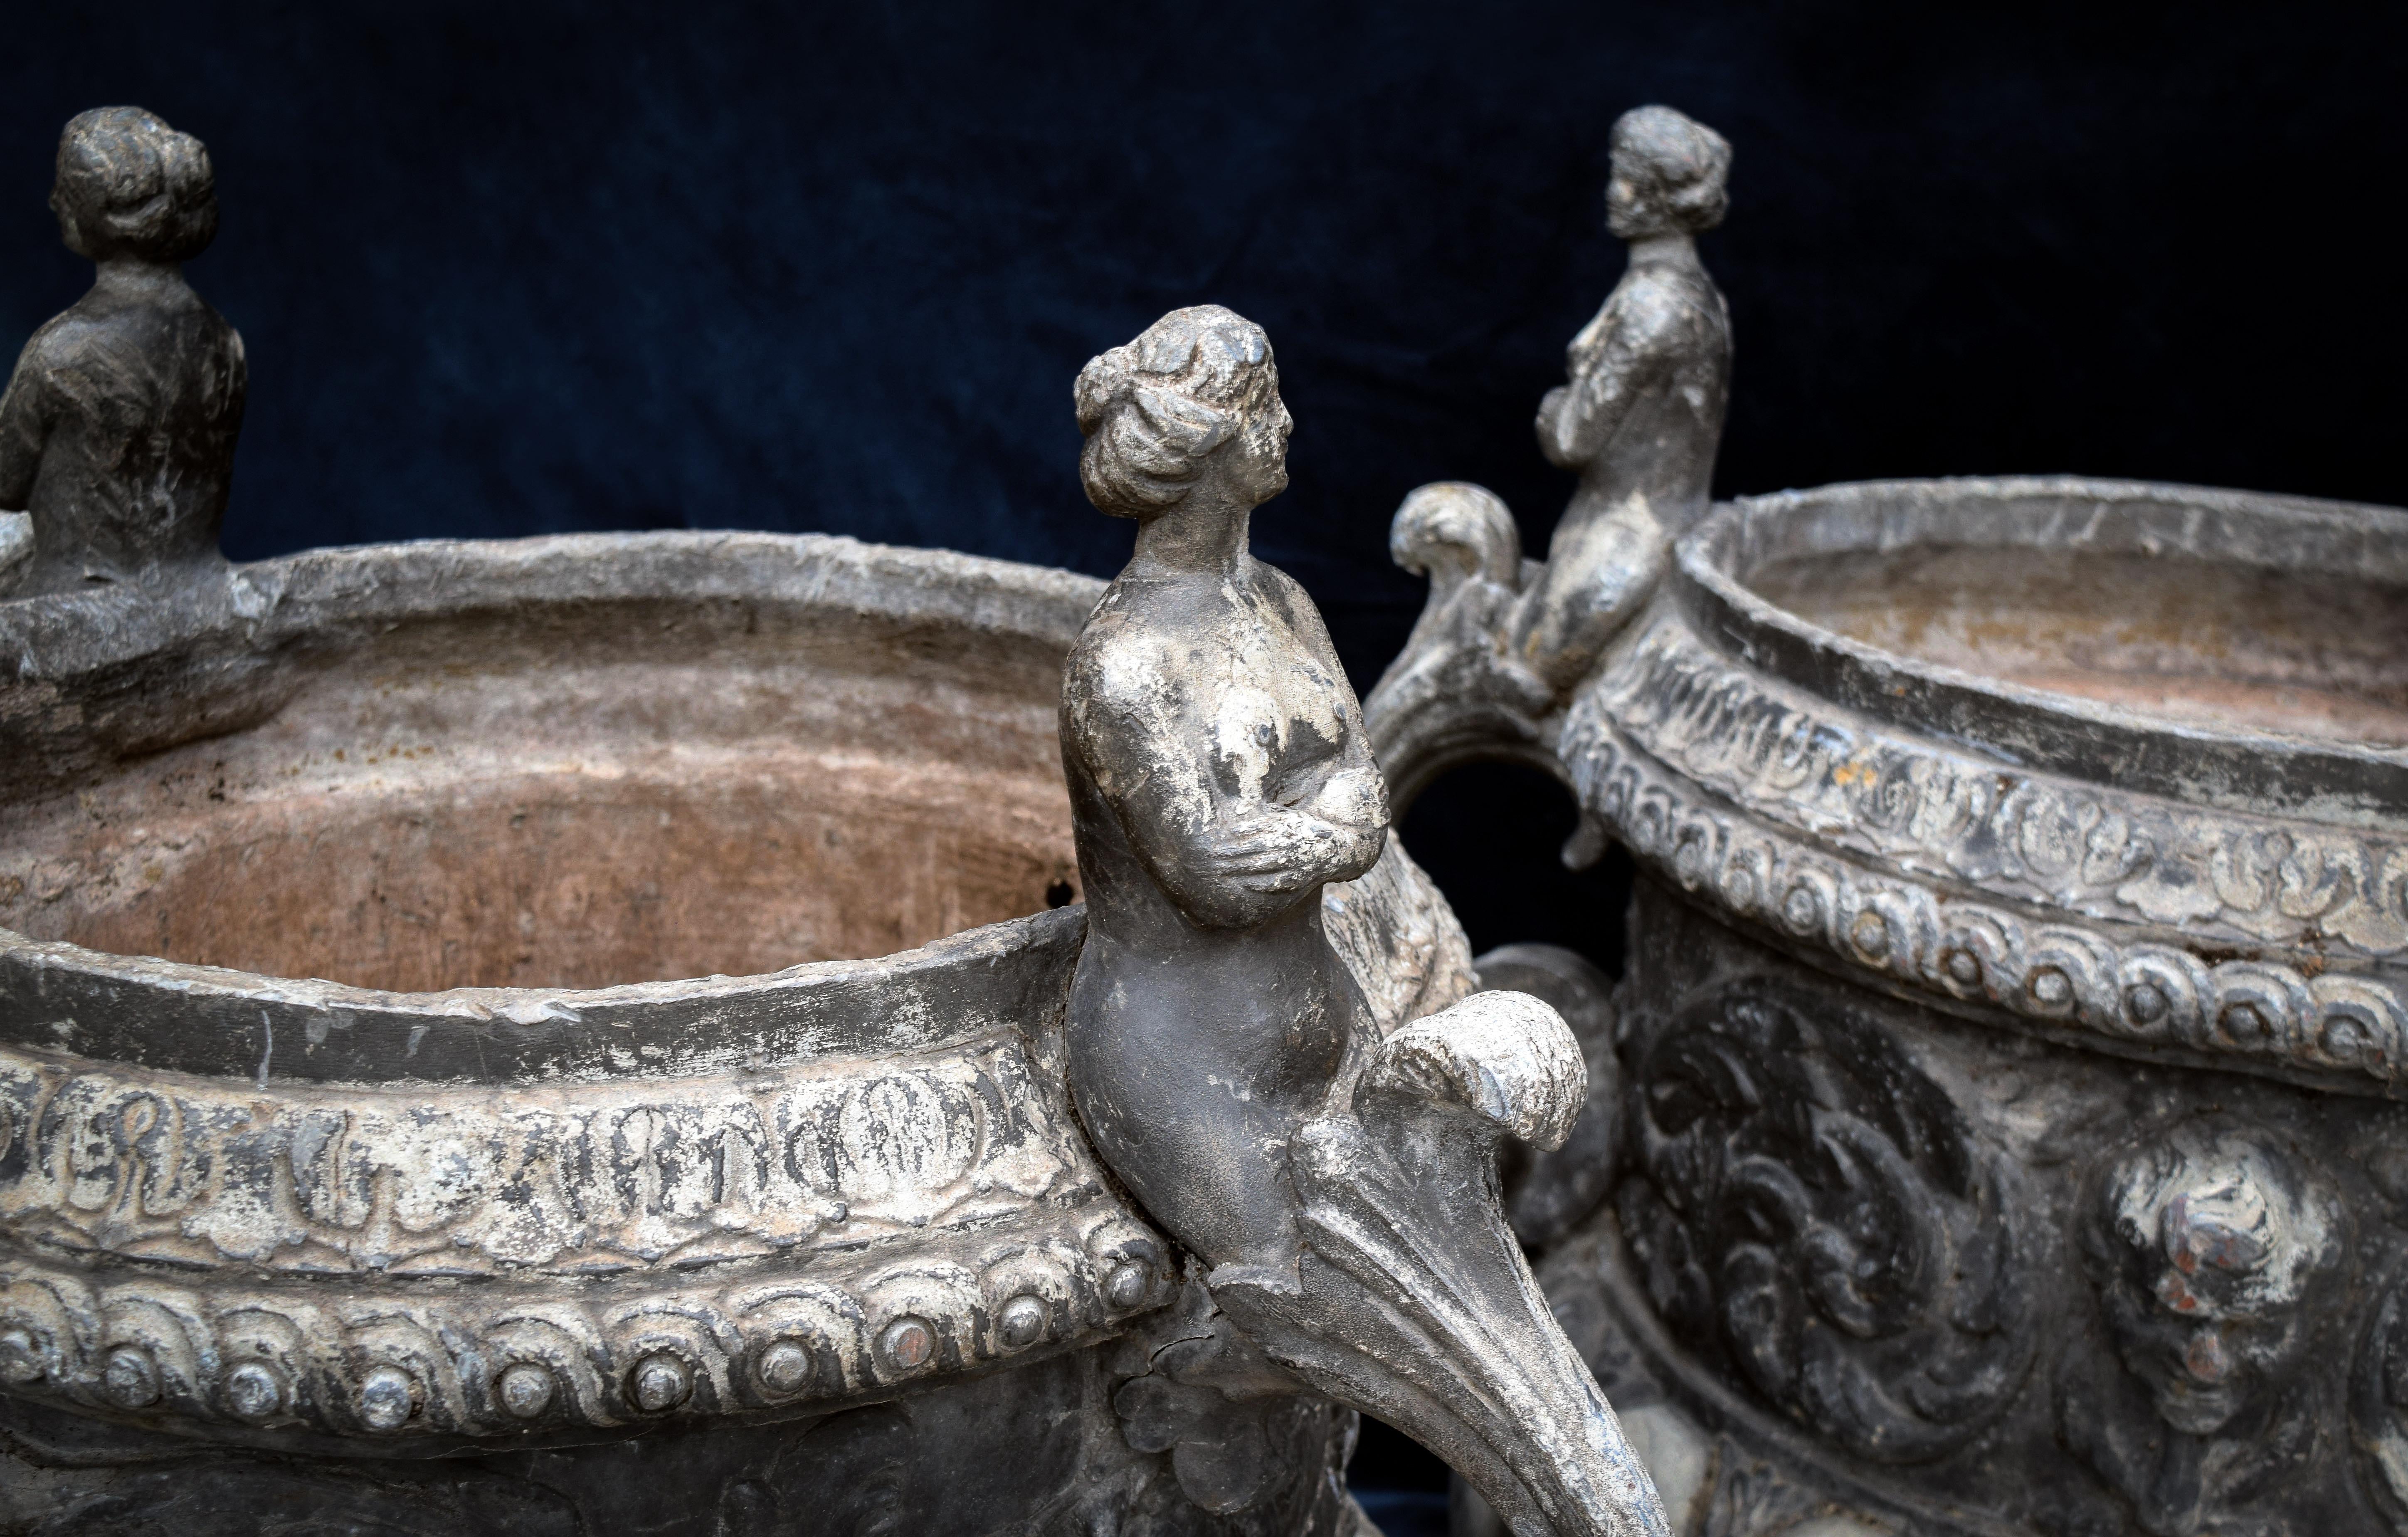 Fleurdetroit is delighted to offer for your consideration this exceptional pair of lead urns. 

A stark statement of function and form, this pair of vintage English lead urns is an arresting archetype of 18th century aesthetic. Purchased from a